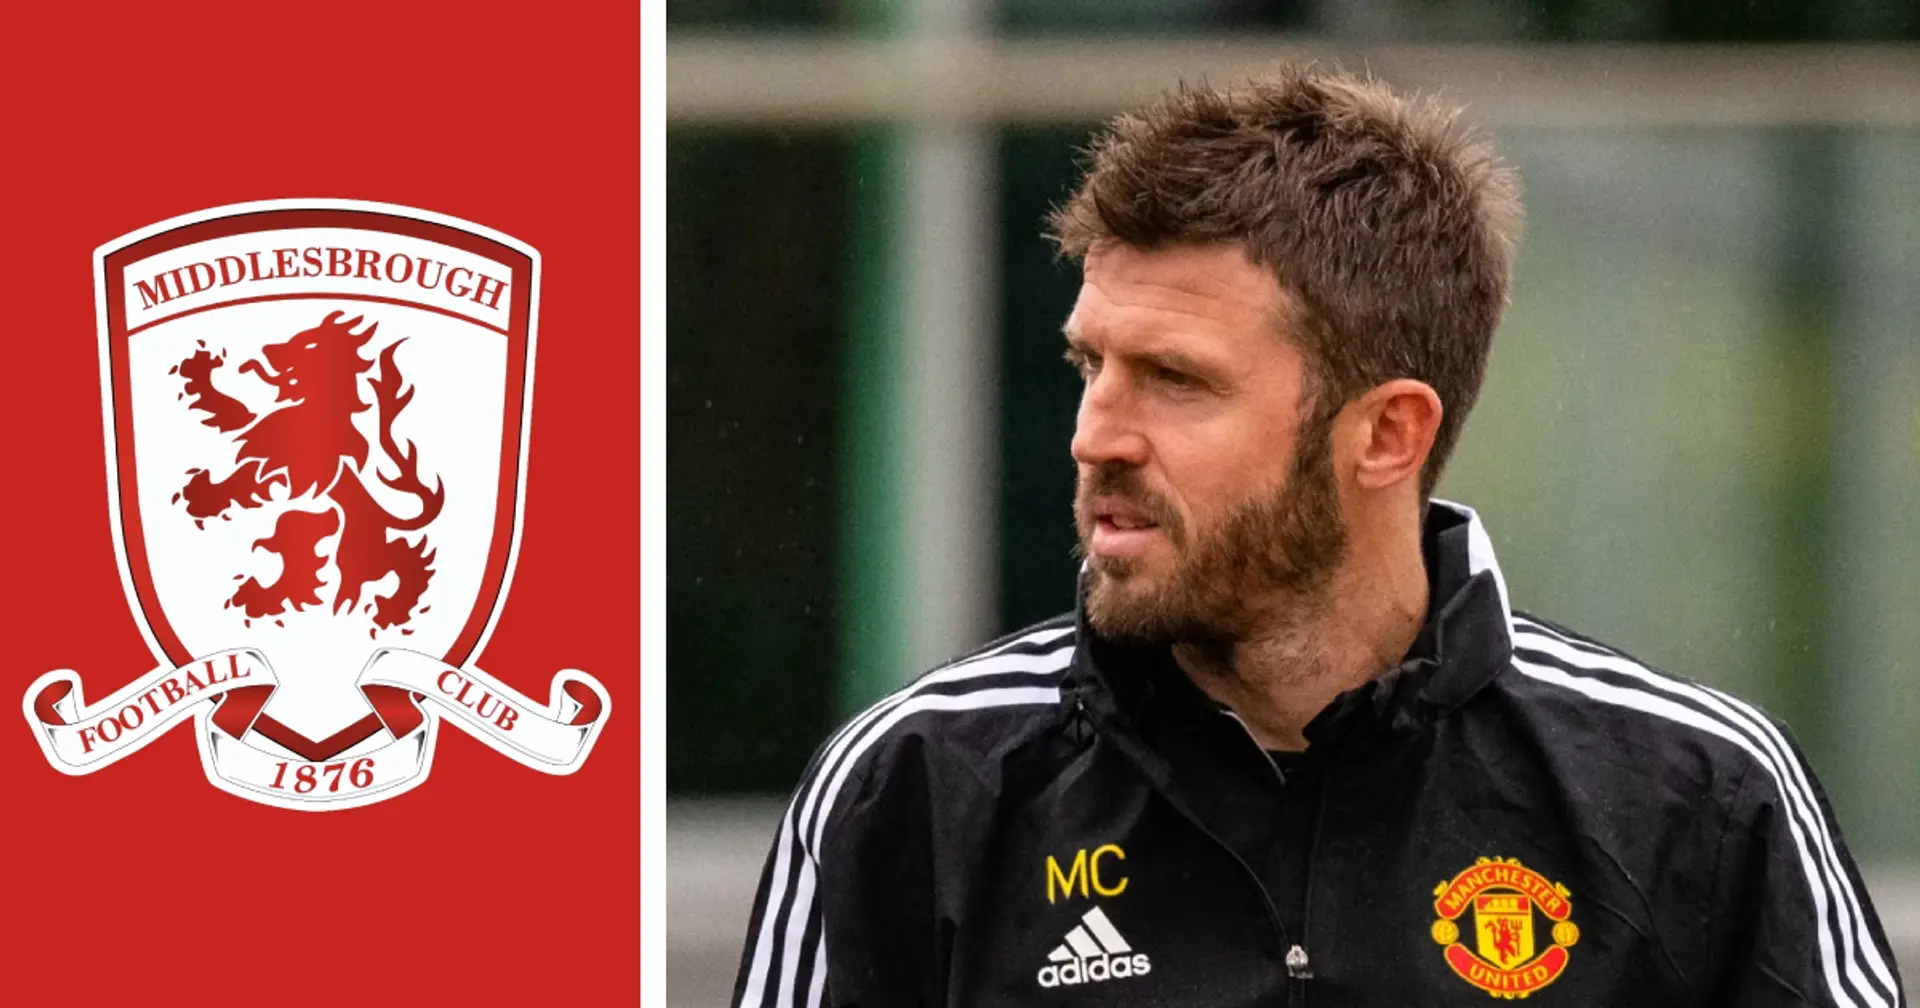 The Athletic: Michael Carrick changes his mind about becoming Middlesbrough manager (reliability: 5 stars)